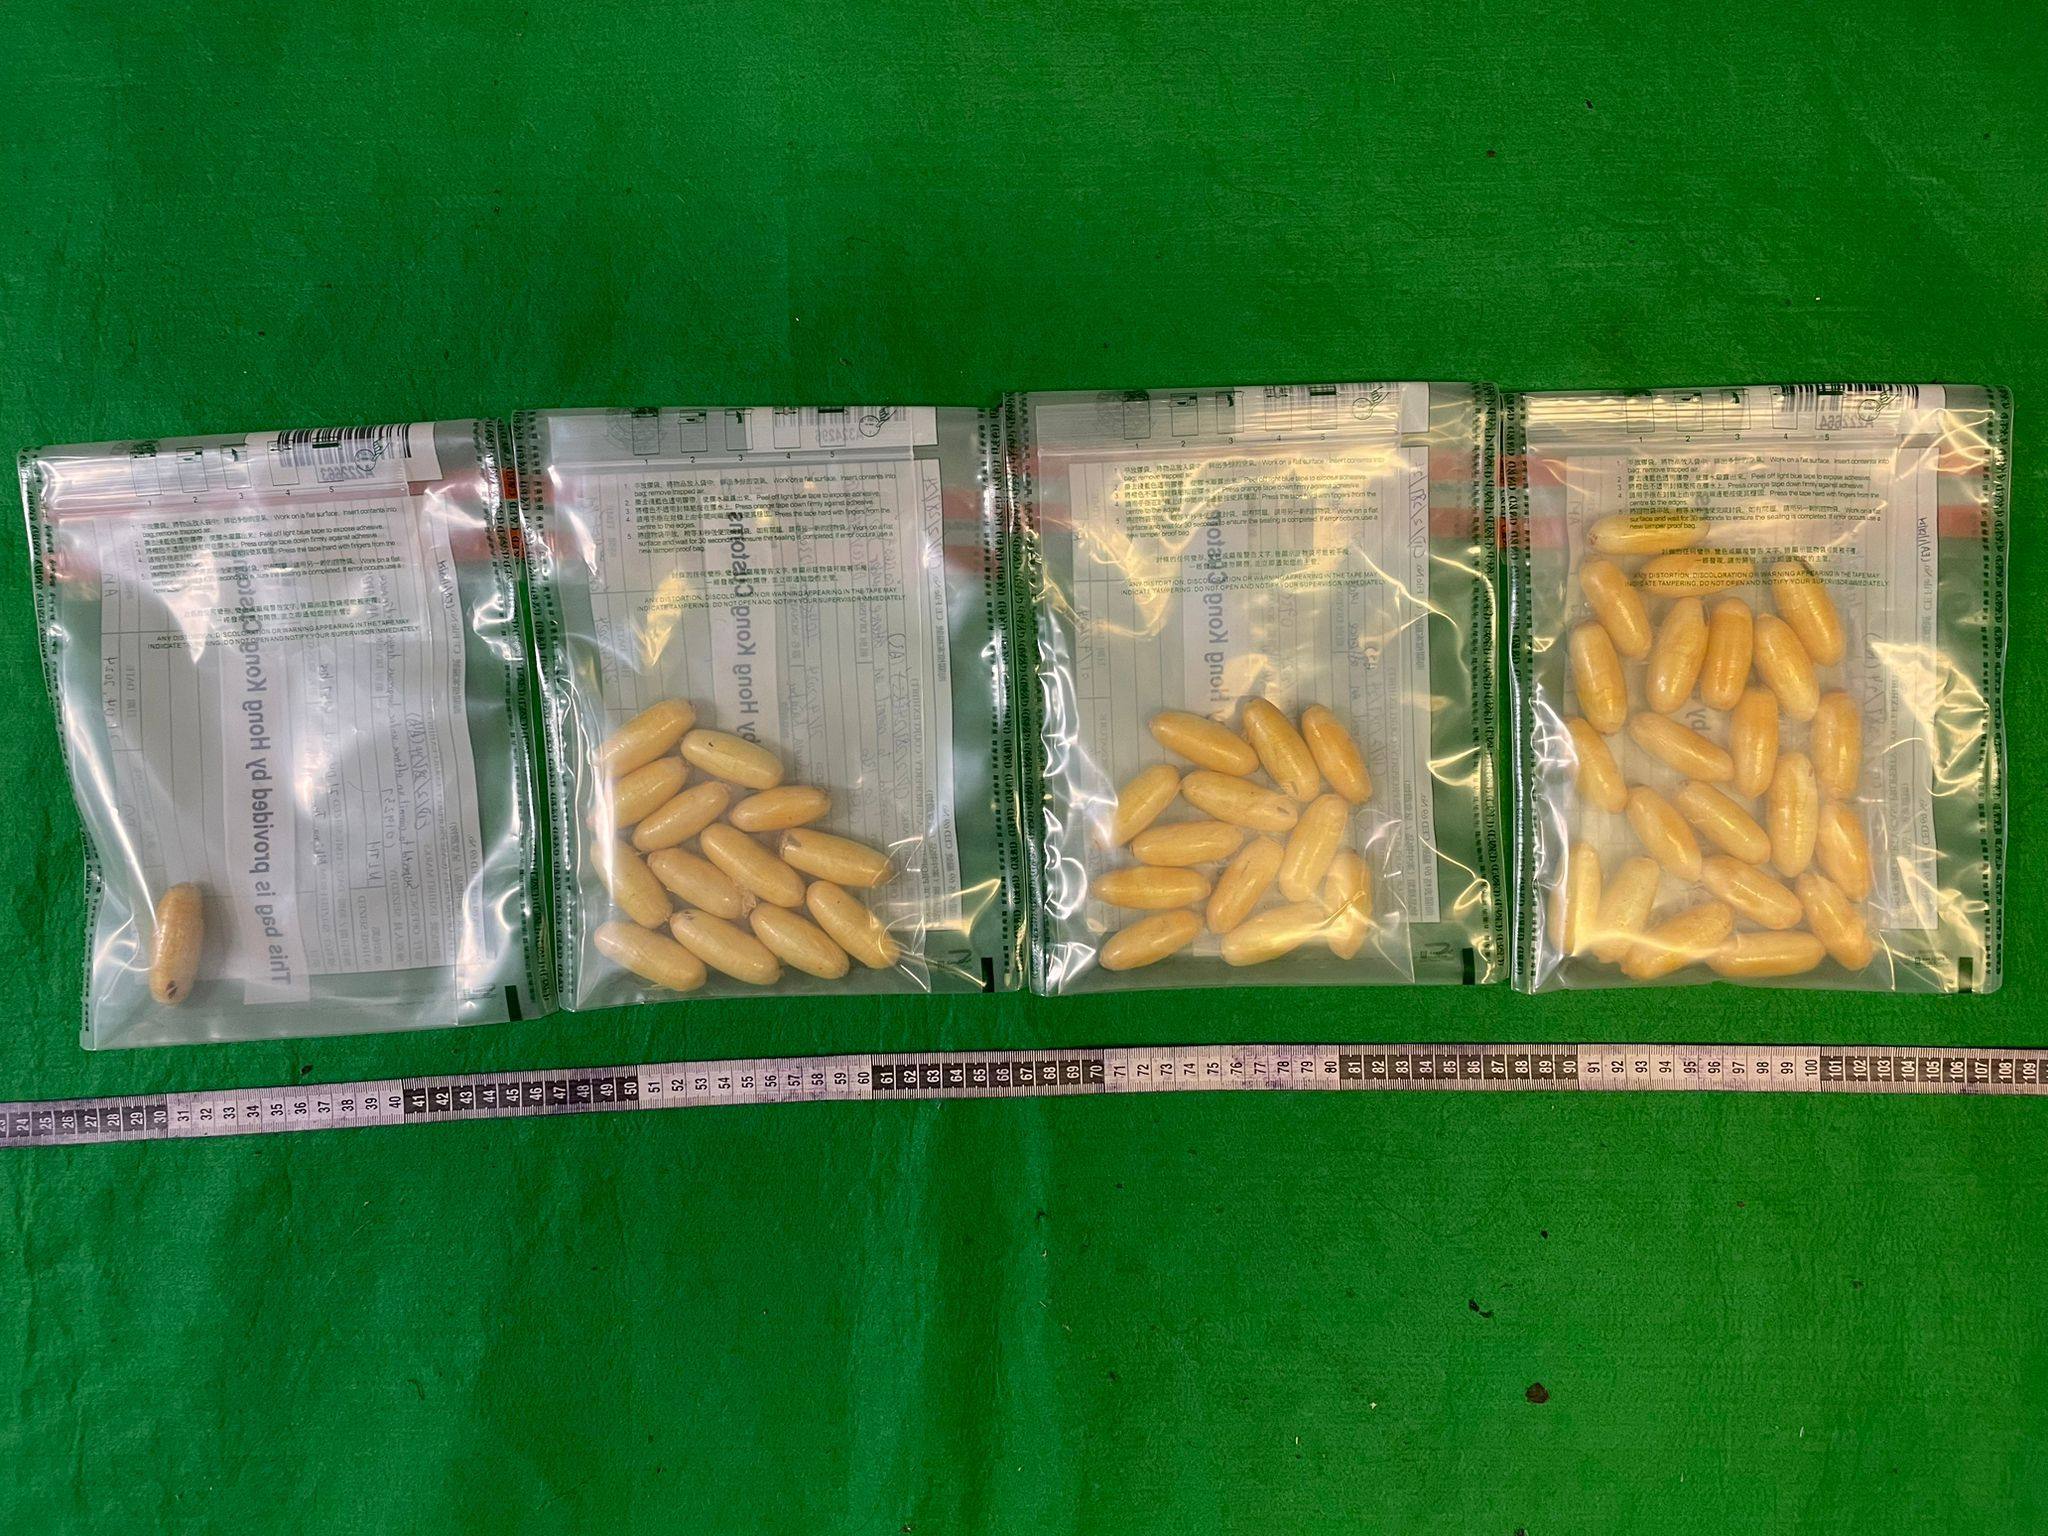 Pellets of suspected cocaine seized by customs. Photo: SCMP